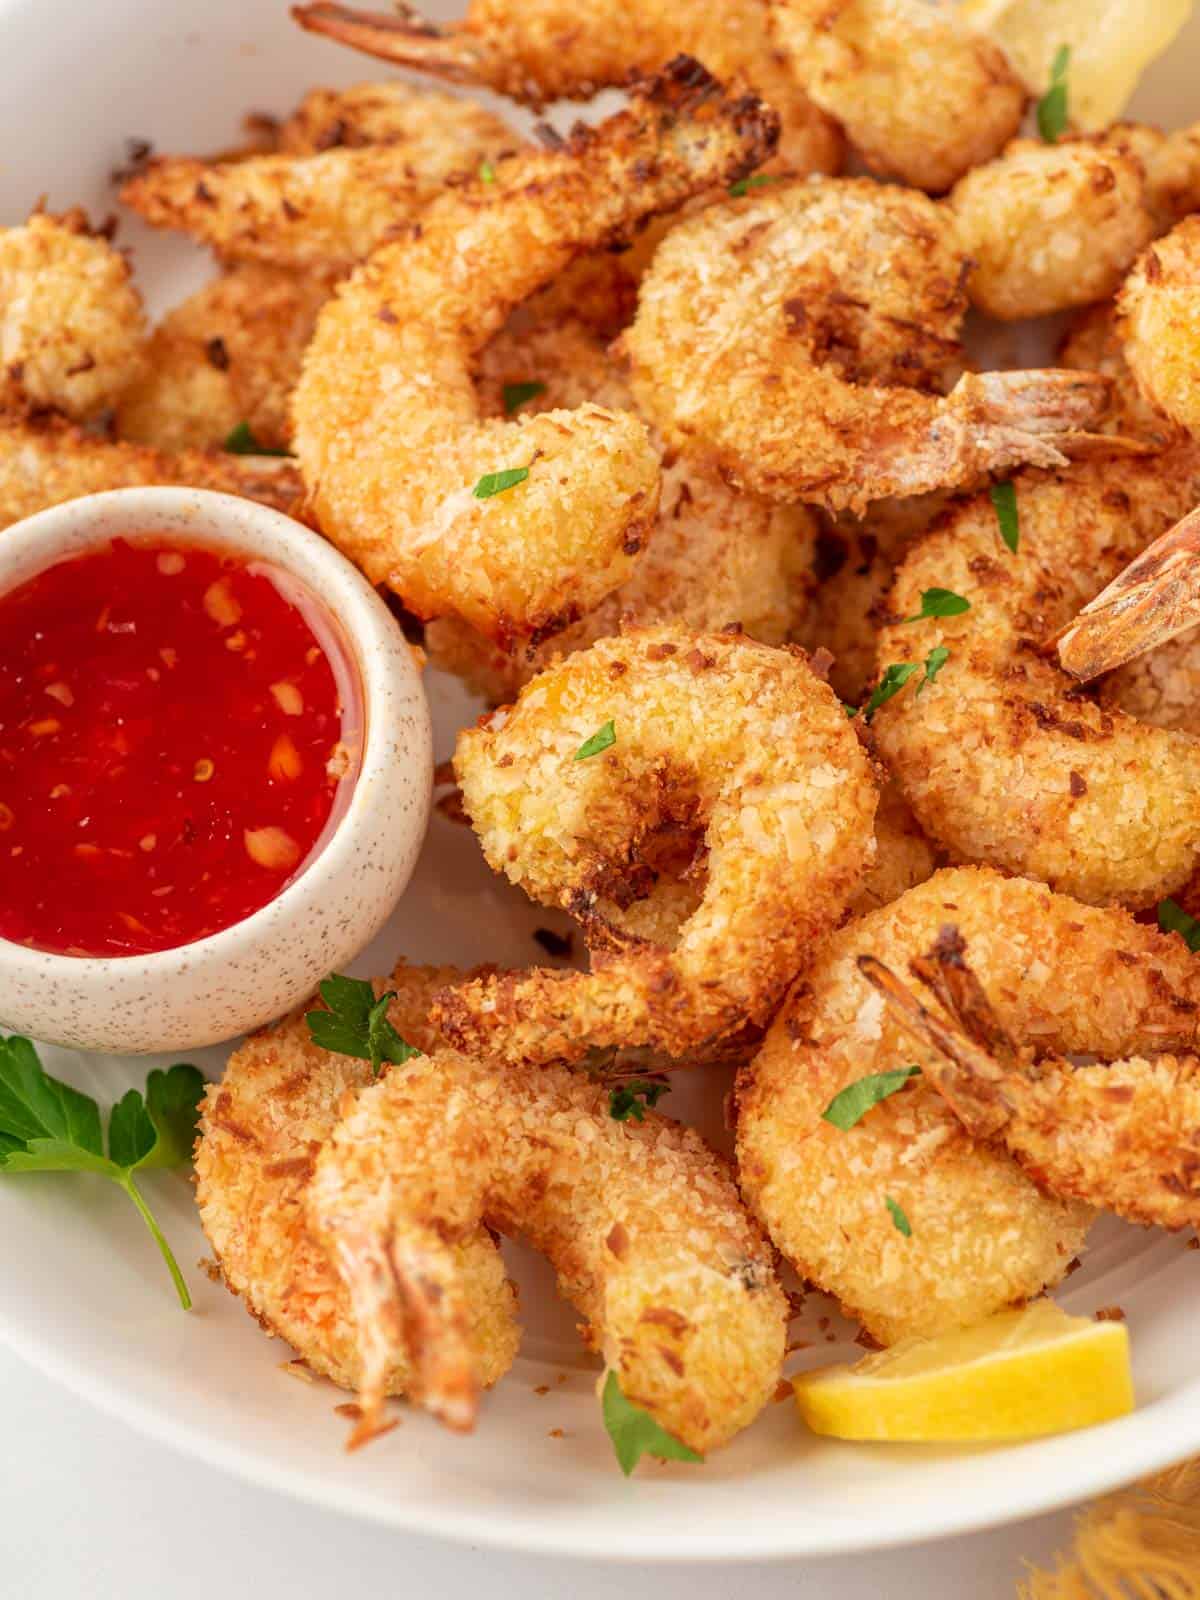 A plate of air fryer breaded shrimp with dipping sauce.